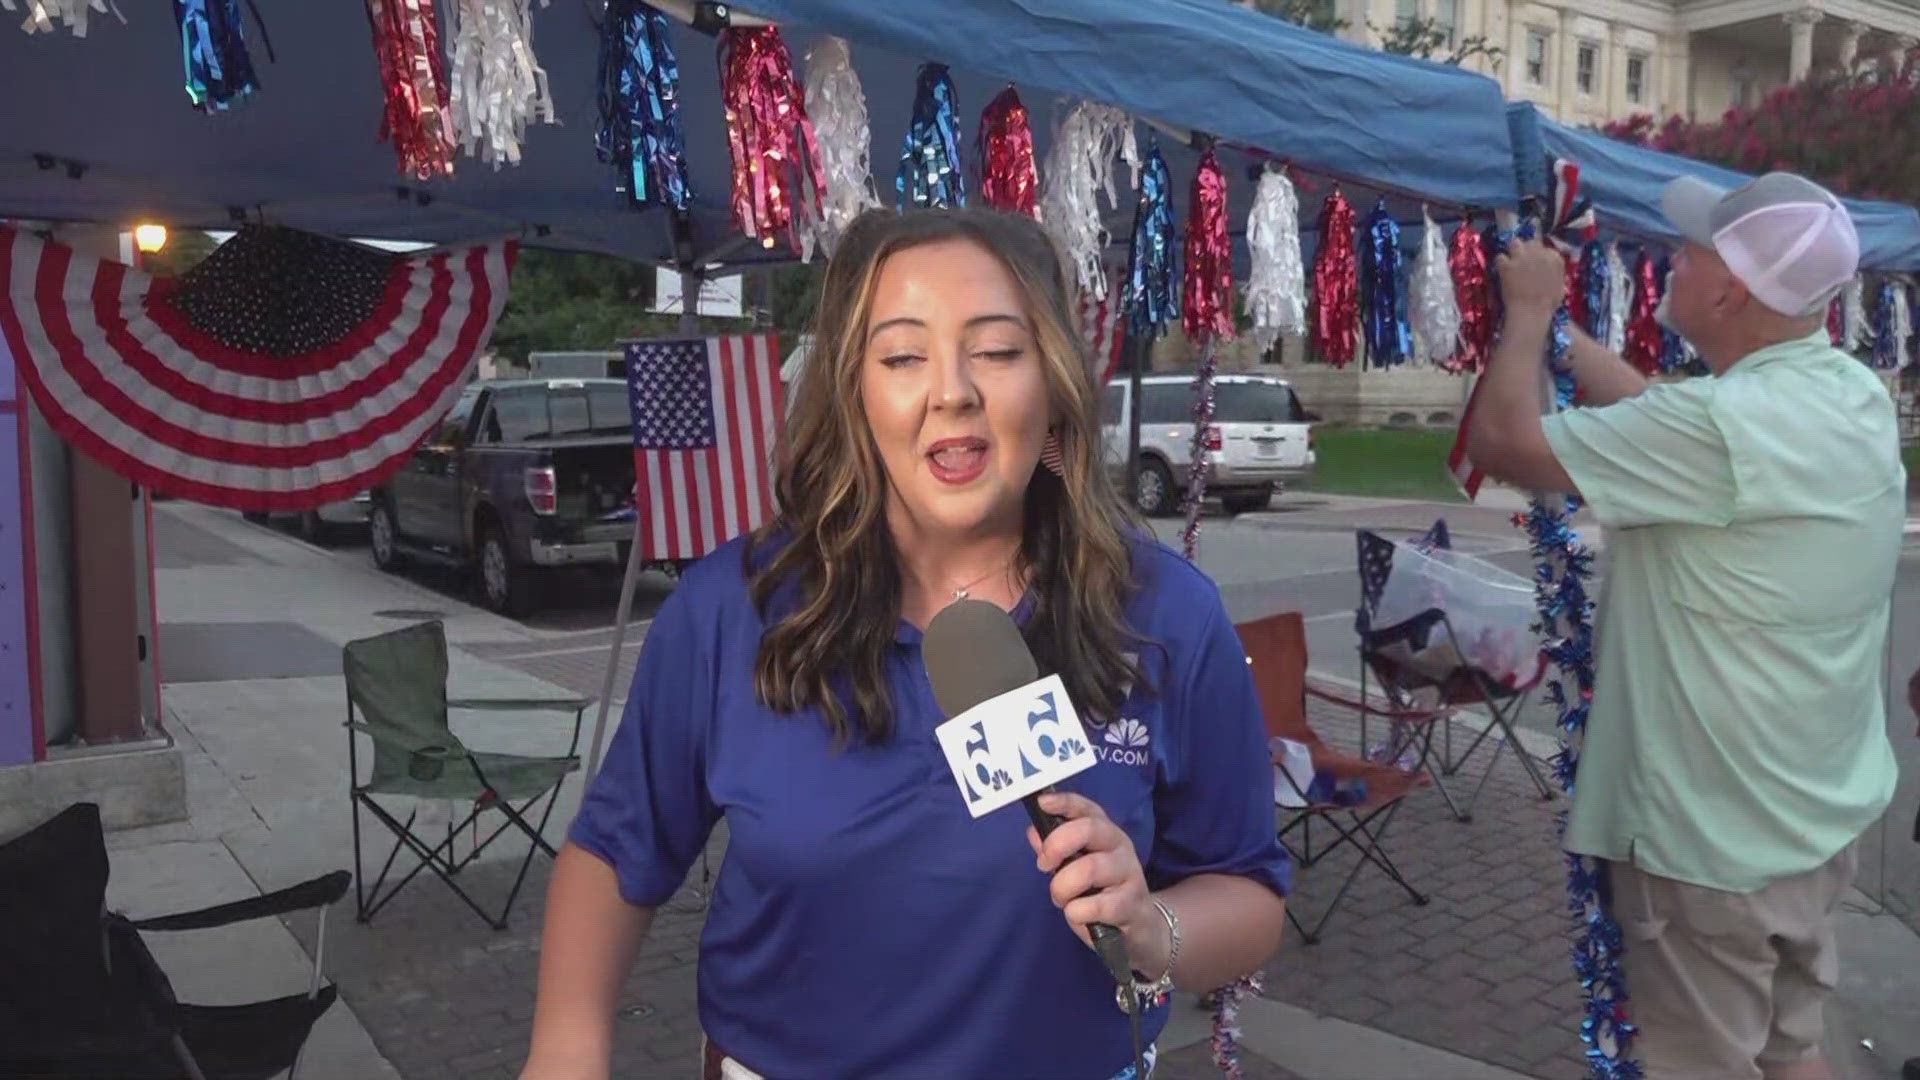 Central Texas families set up early before the 4th of July parade even begins.